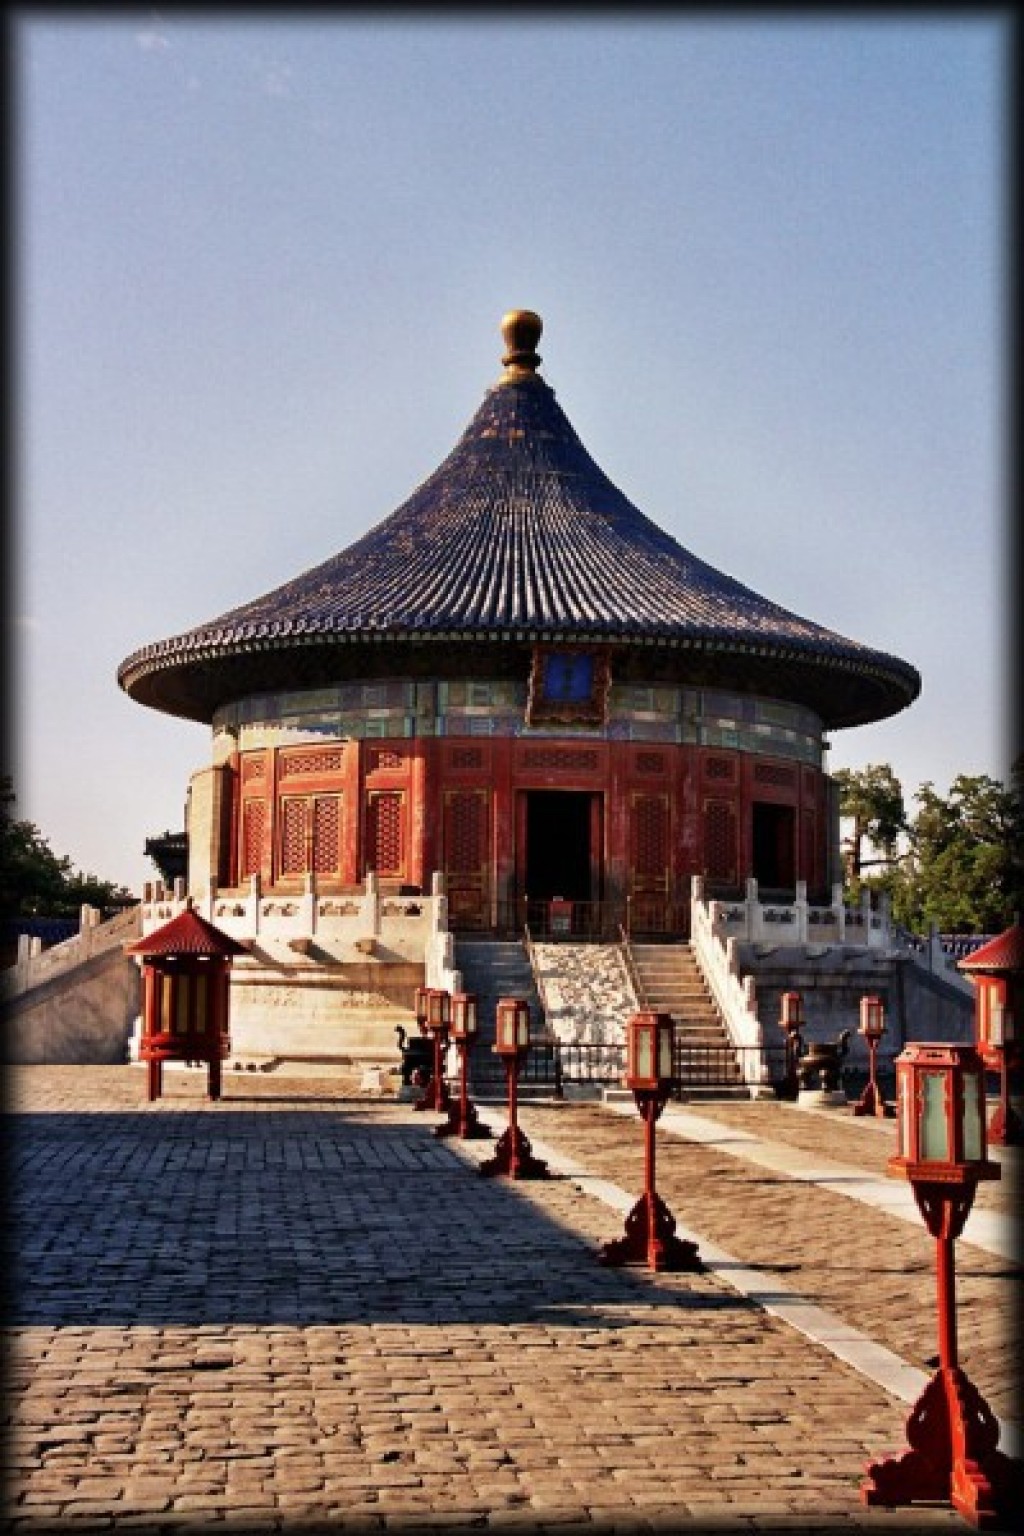 The Temple of Heaven is beautiful park and temple in the middle of Beijing.  It is a welcomed escape from the traffic and noise outside it's walls.